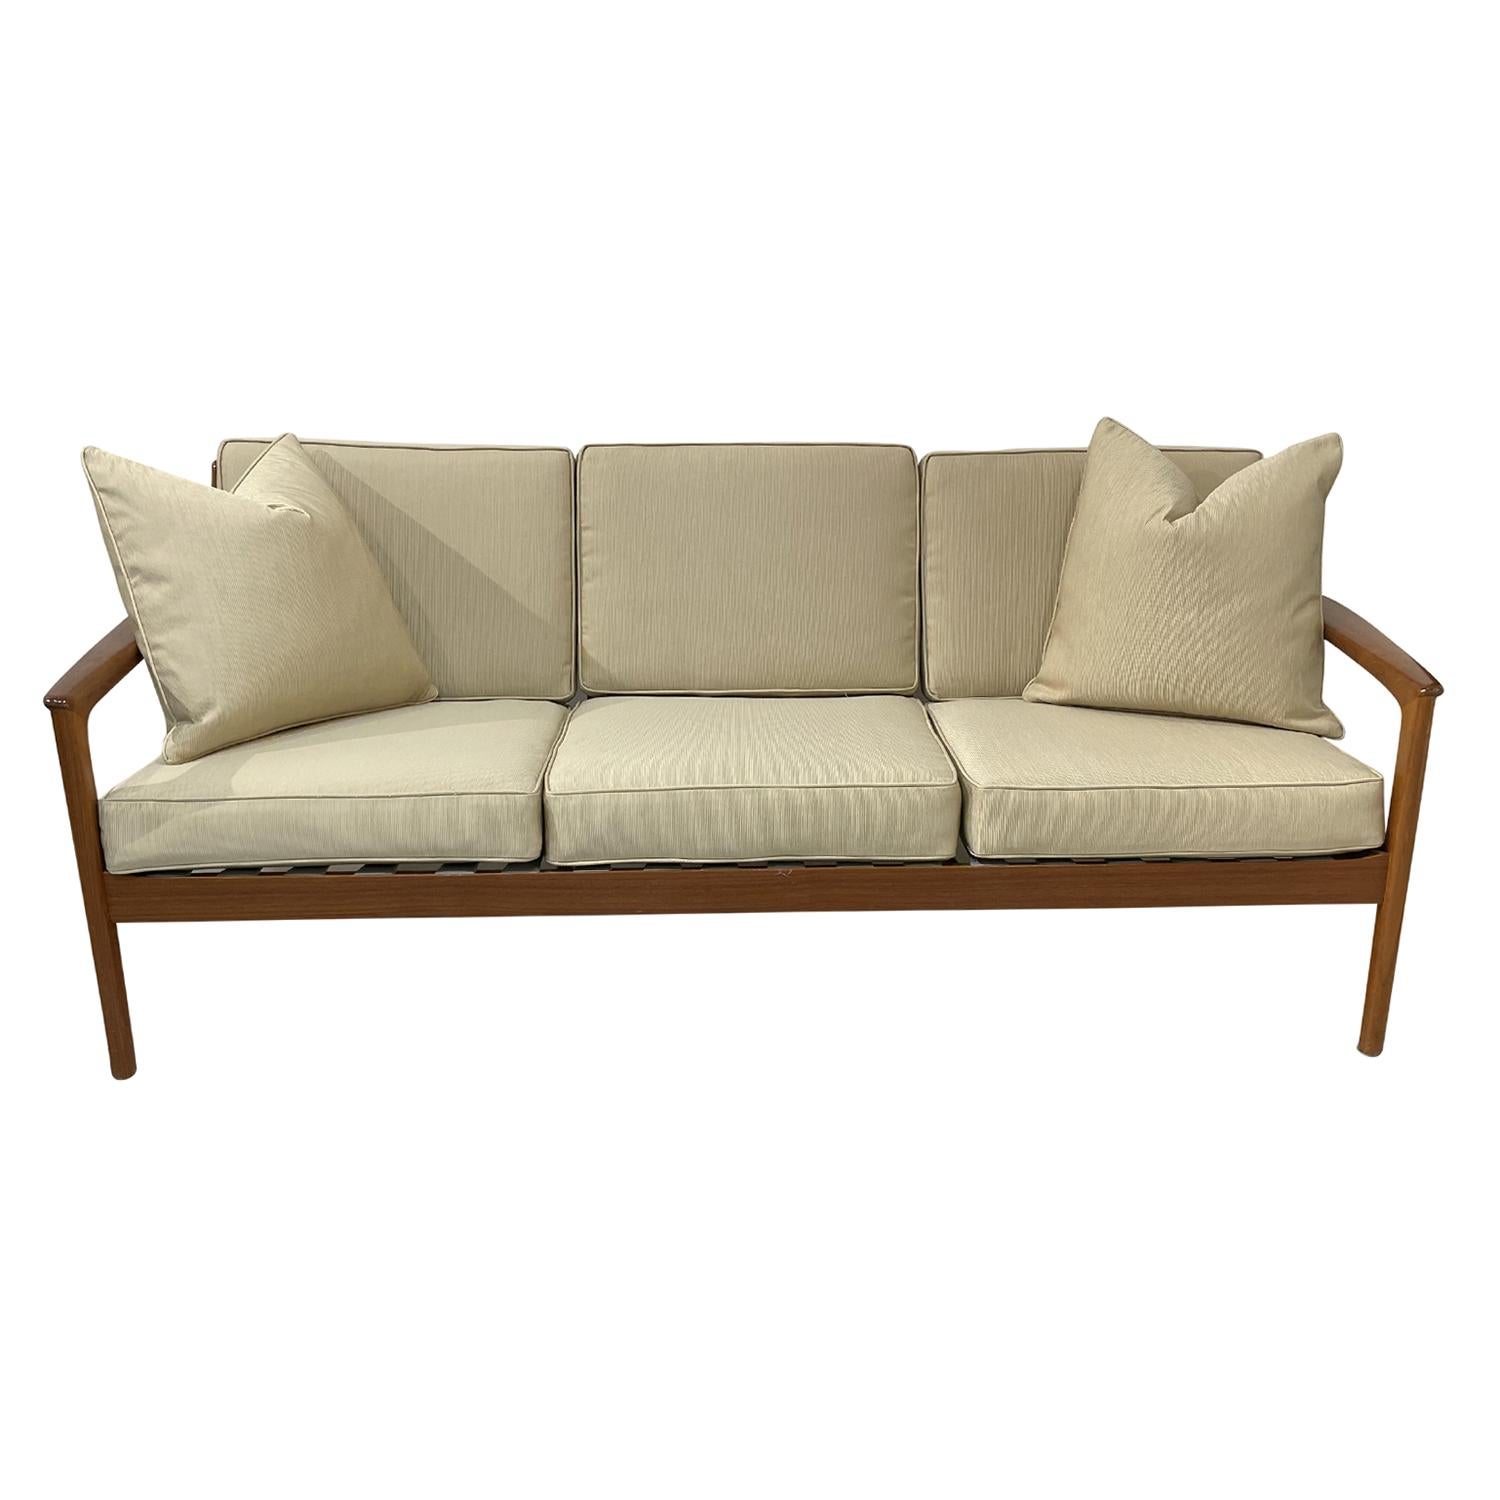 A dark-brown, vintage Mid-Century Modern Swedish three seater sofa with two pillows made of hand crafted polished Teakwood, designed by Folke Ohlsson and produced by DUX, in good condition. The Scandinavian settee, canapé has a slightly inclined